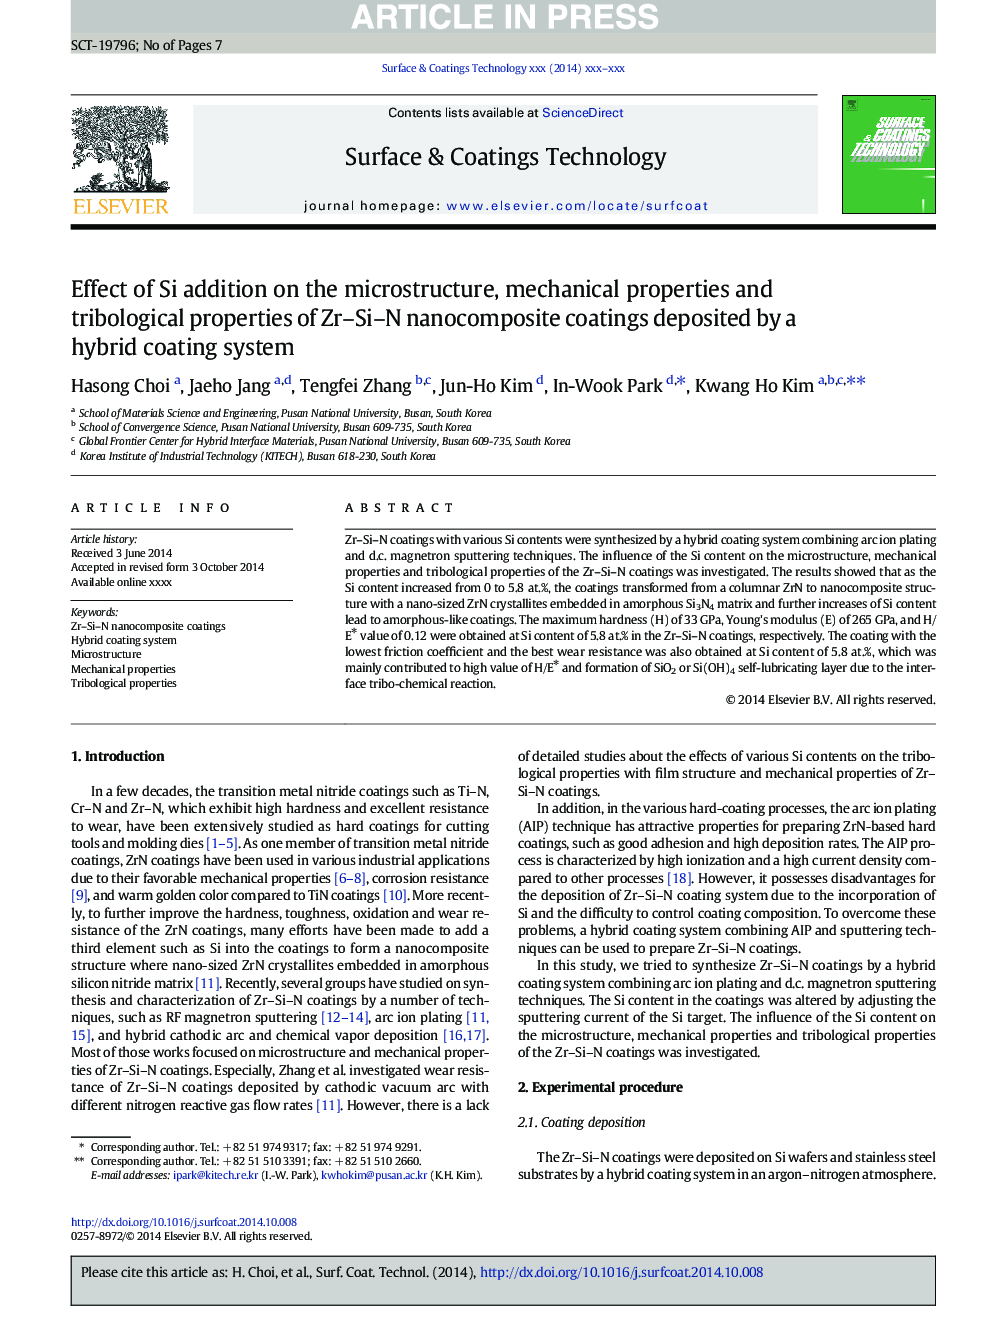 Effect of Si addition on the microstructure, mechanical properties and tribological properties of Zr-Si-N nanocomposite coatings deposited by a hybrid coating system